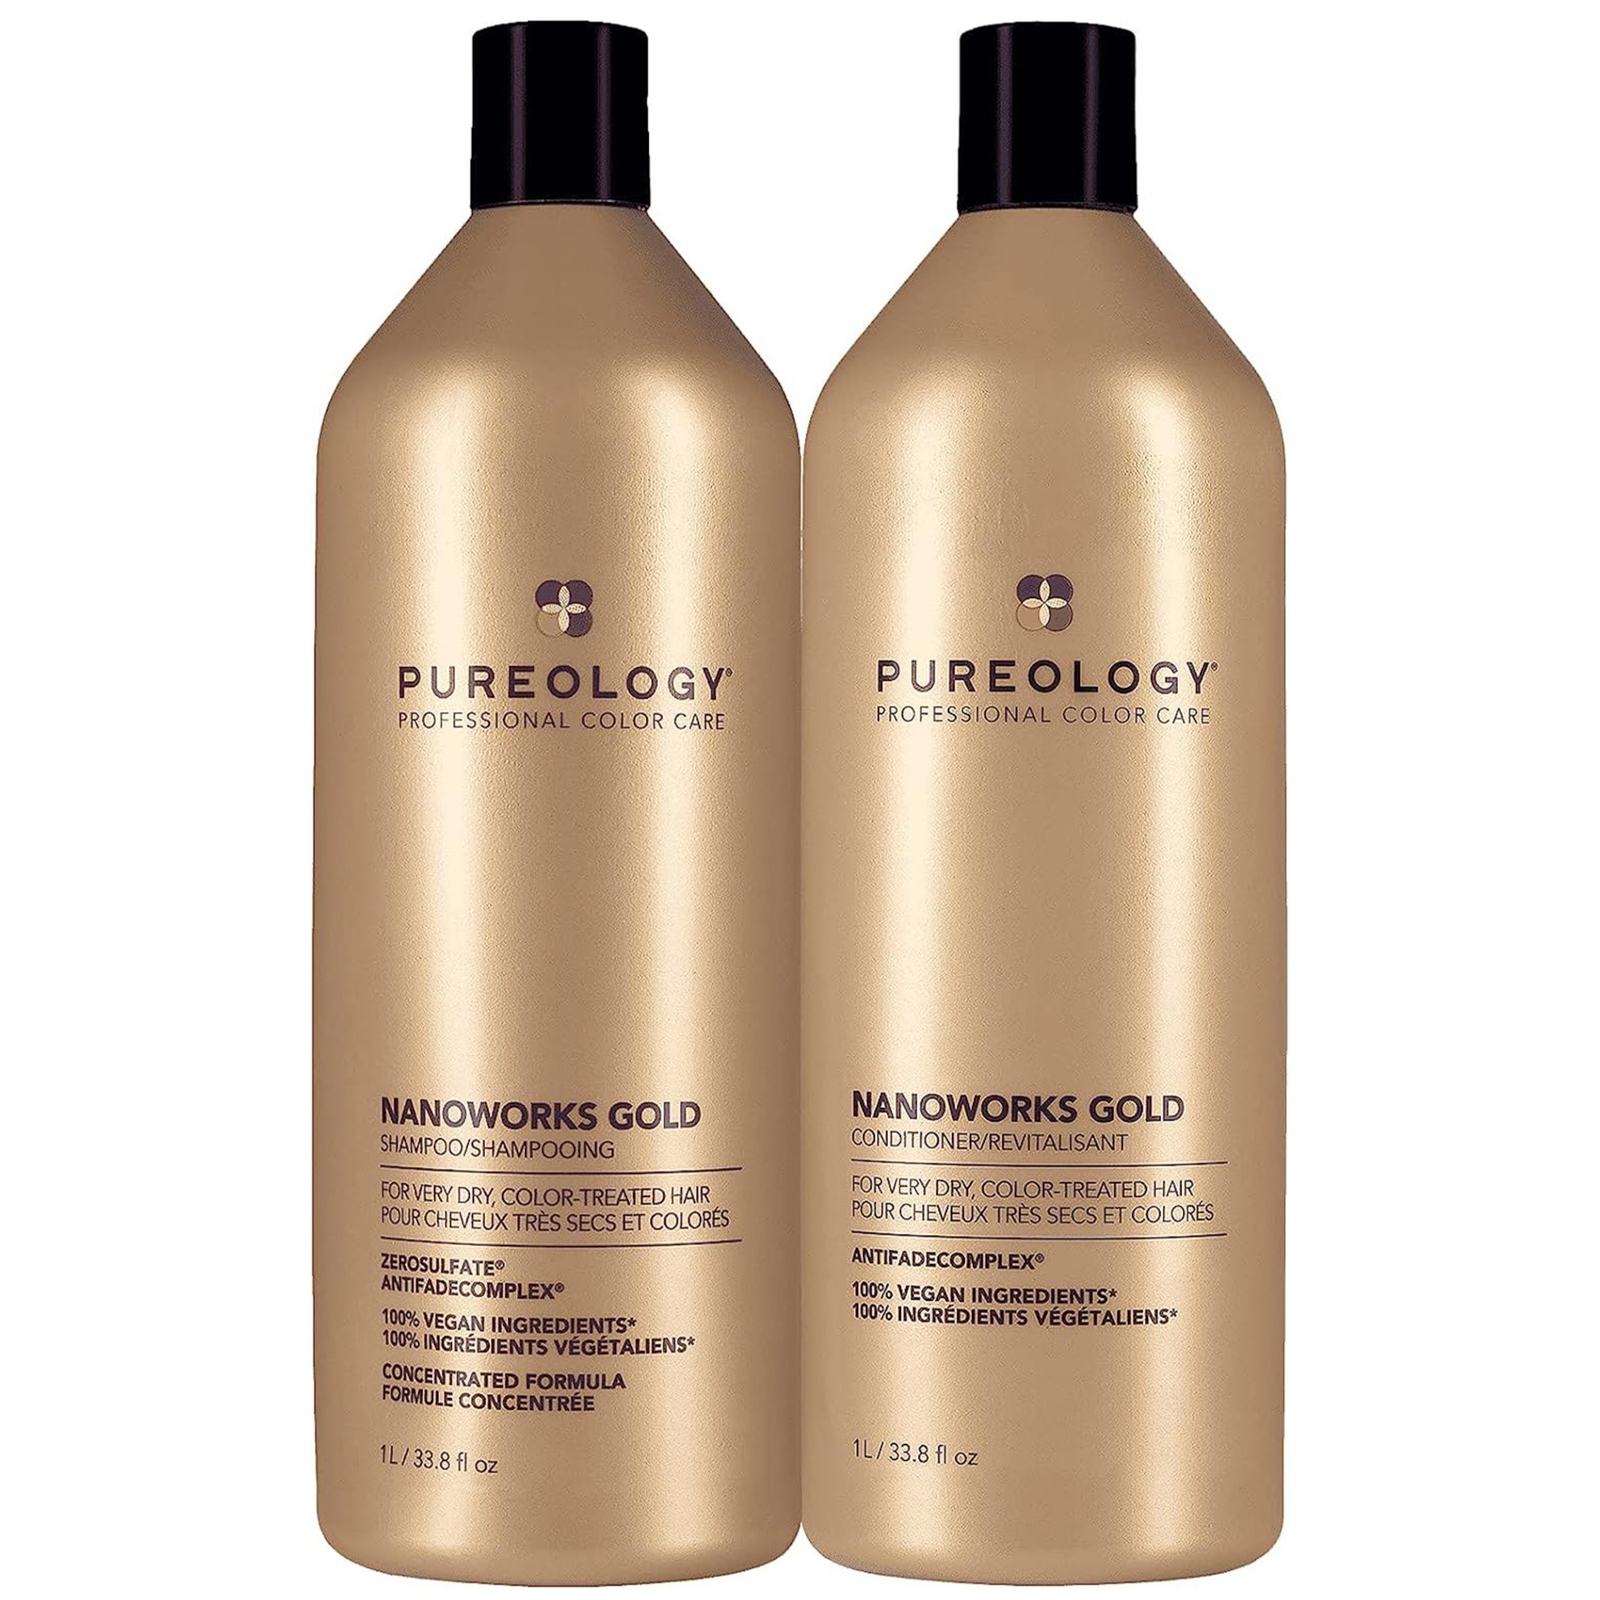 Pureology Nanoworks Gold Shampoo and Conditioner Routine For Very Dry, Colour Treated Hair